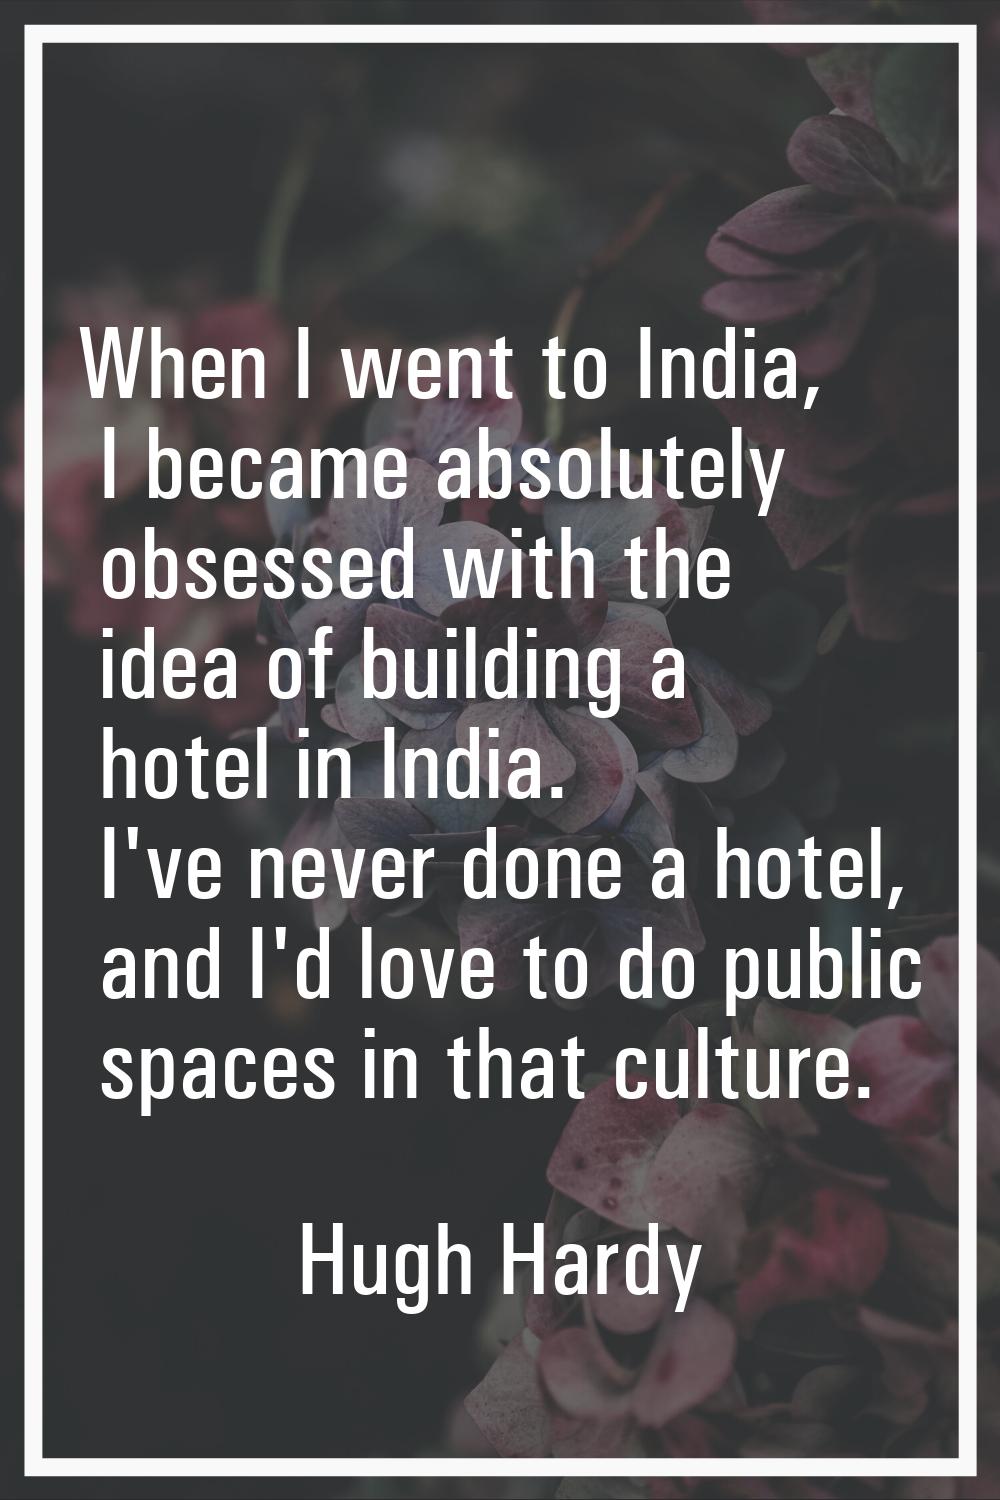 When I went to India, I became absolutely obsessed with the idea of building a hotel in India. I've